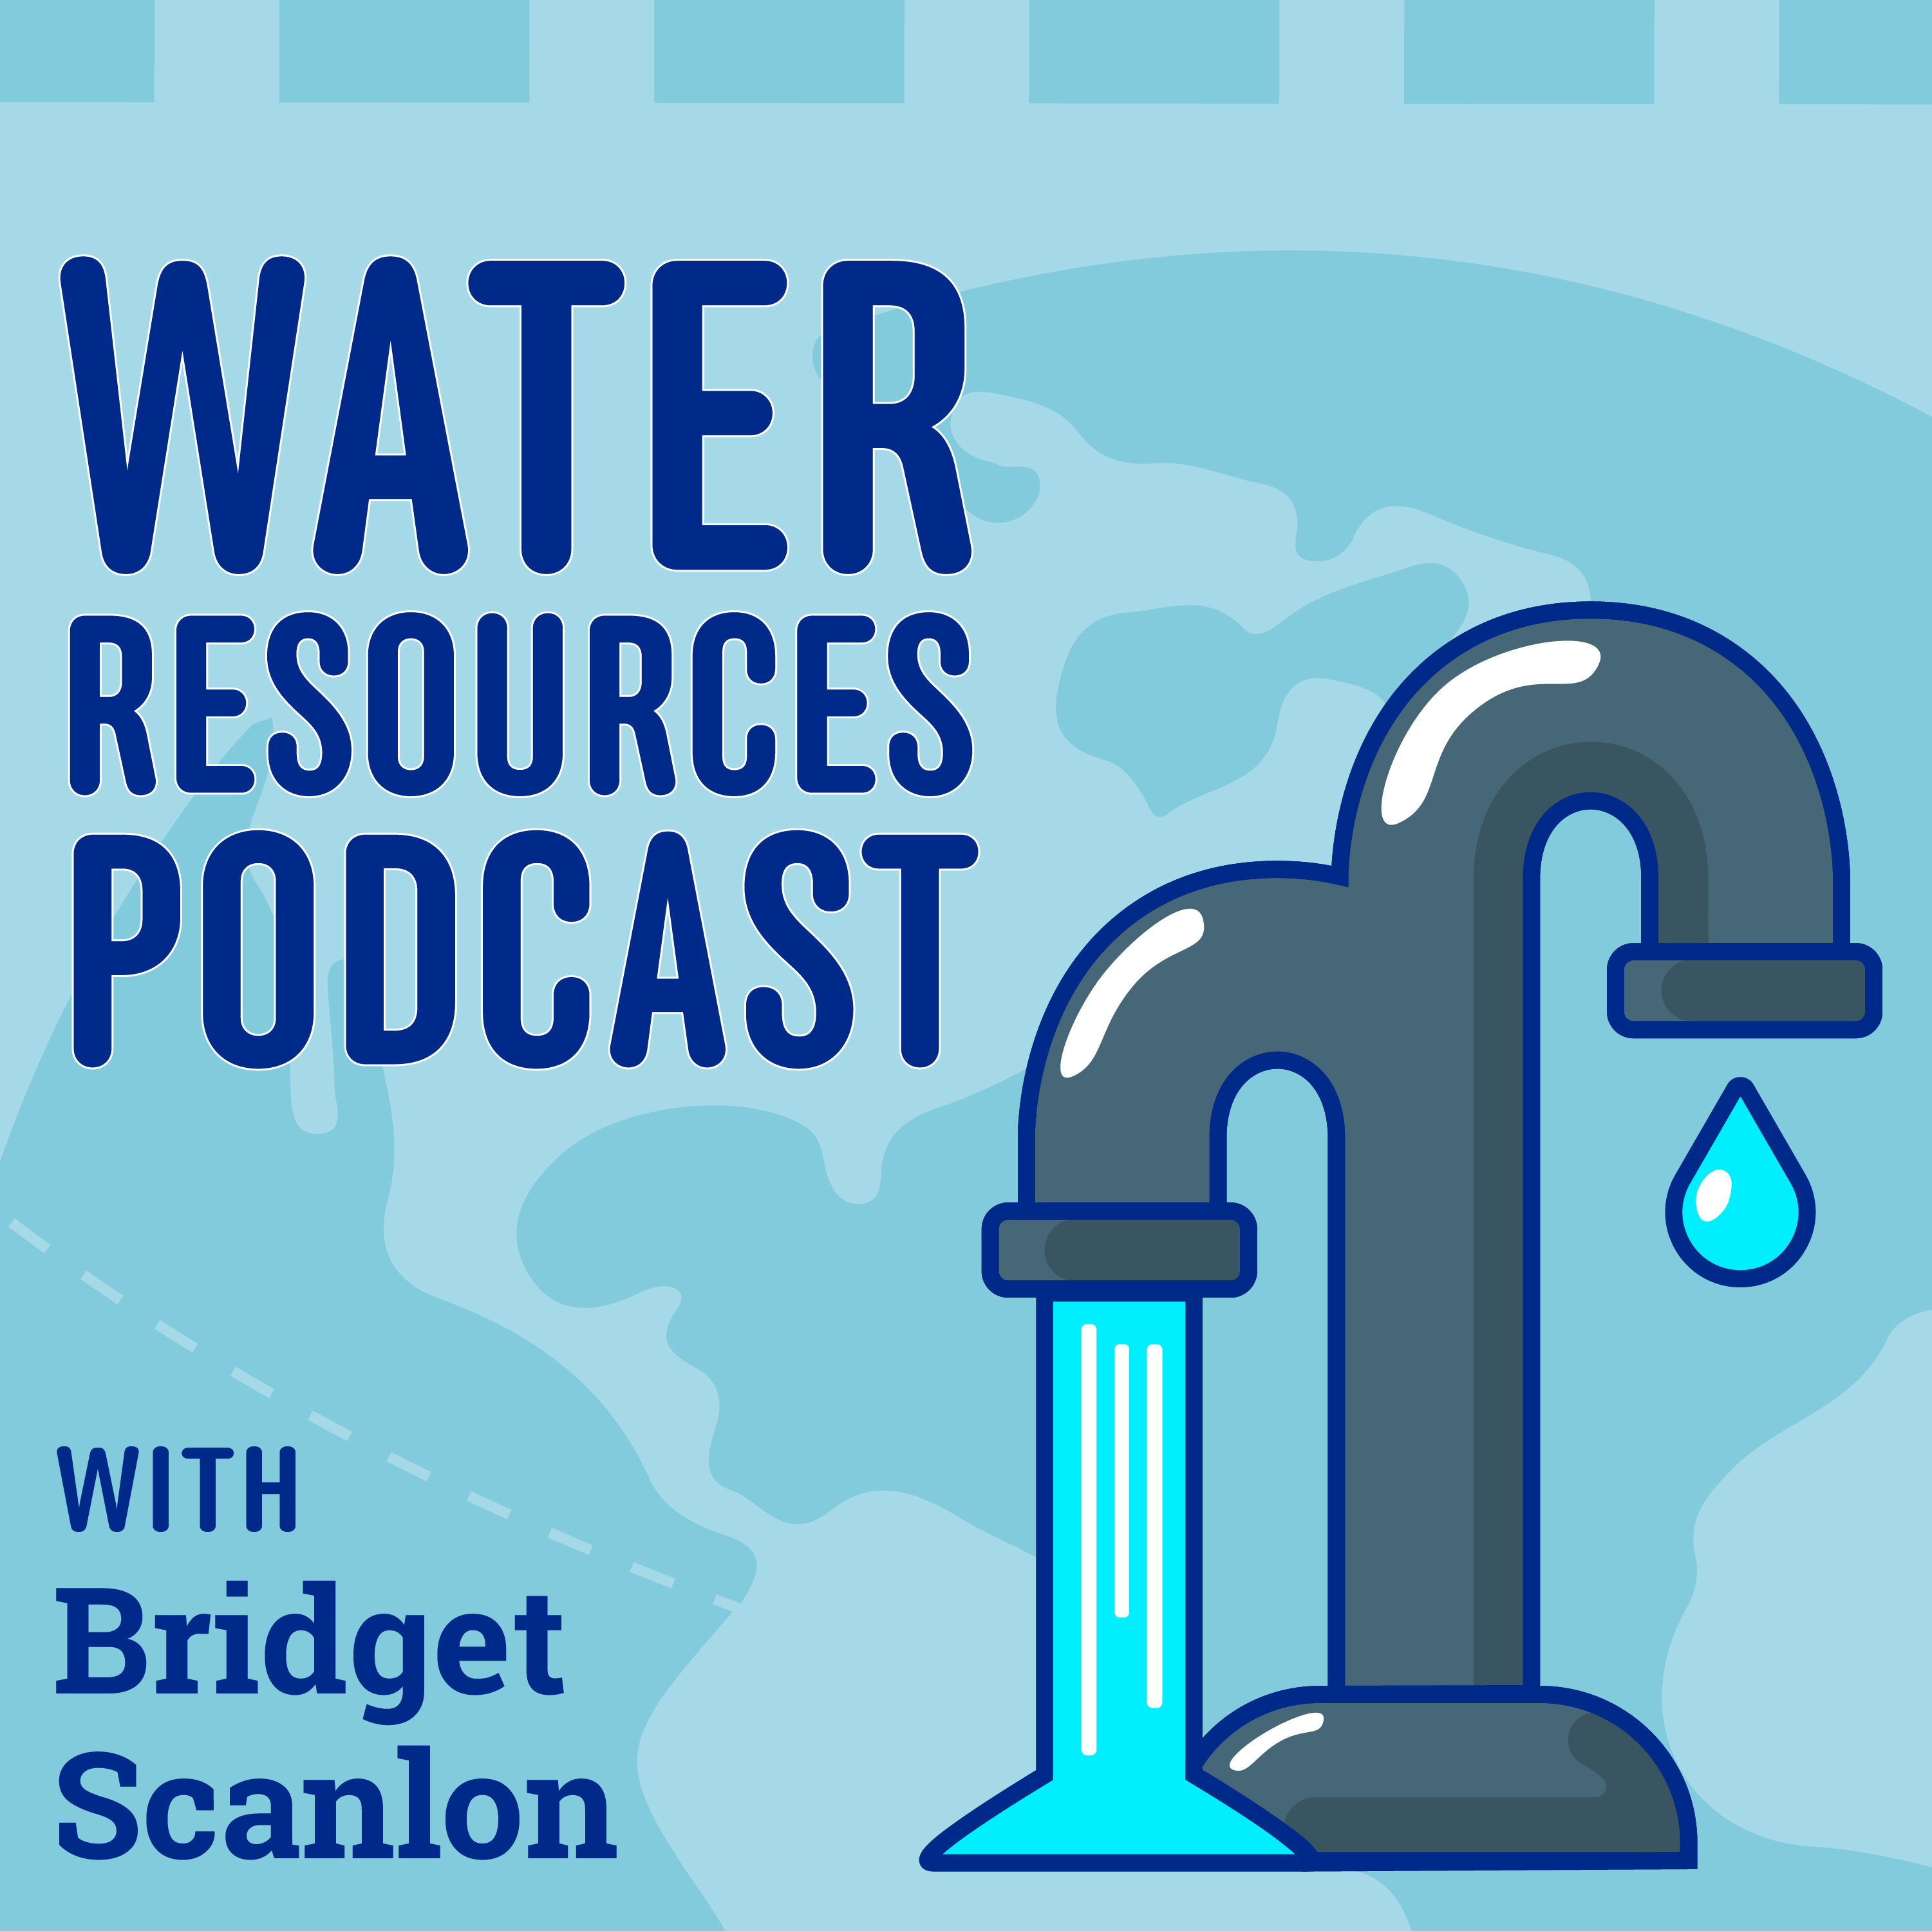 Go to Water Resources Podcast website